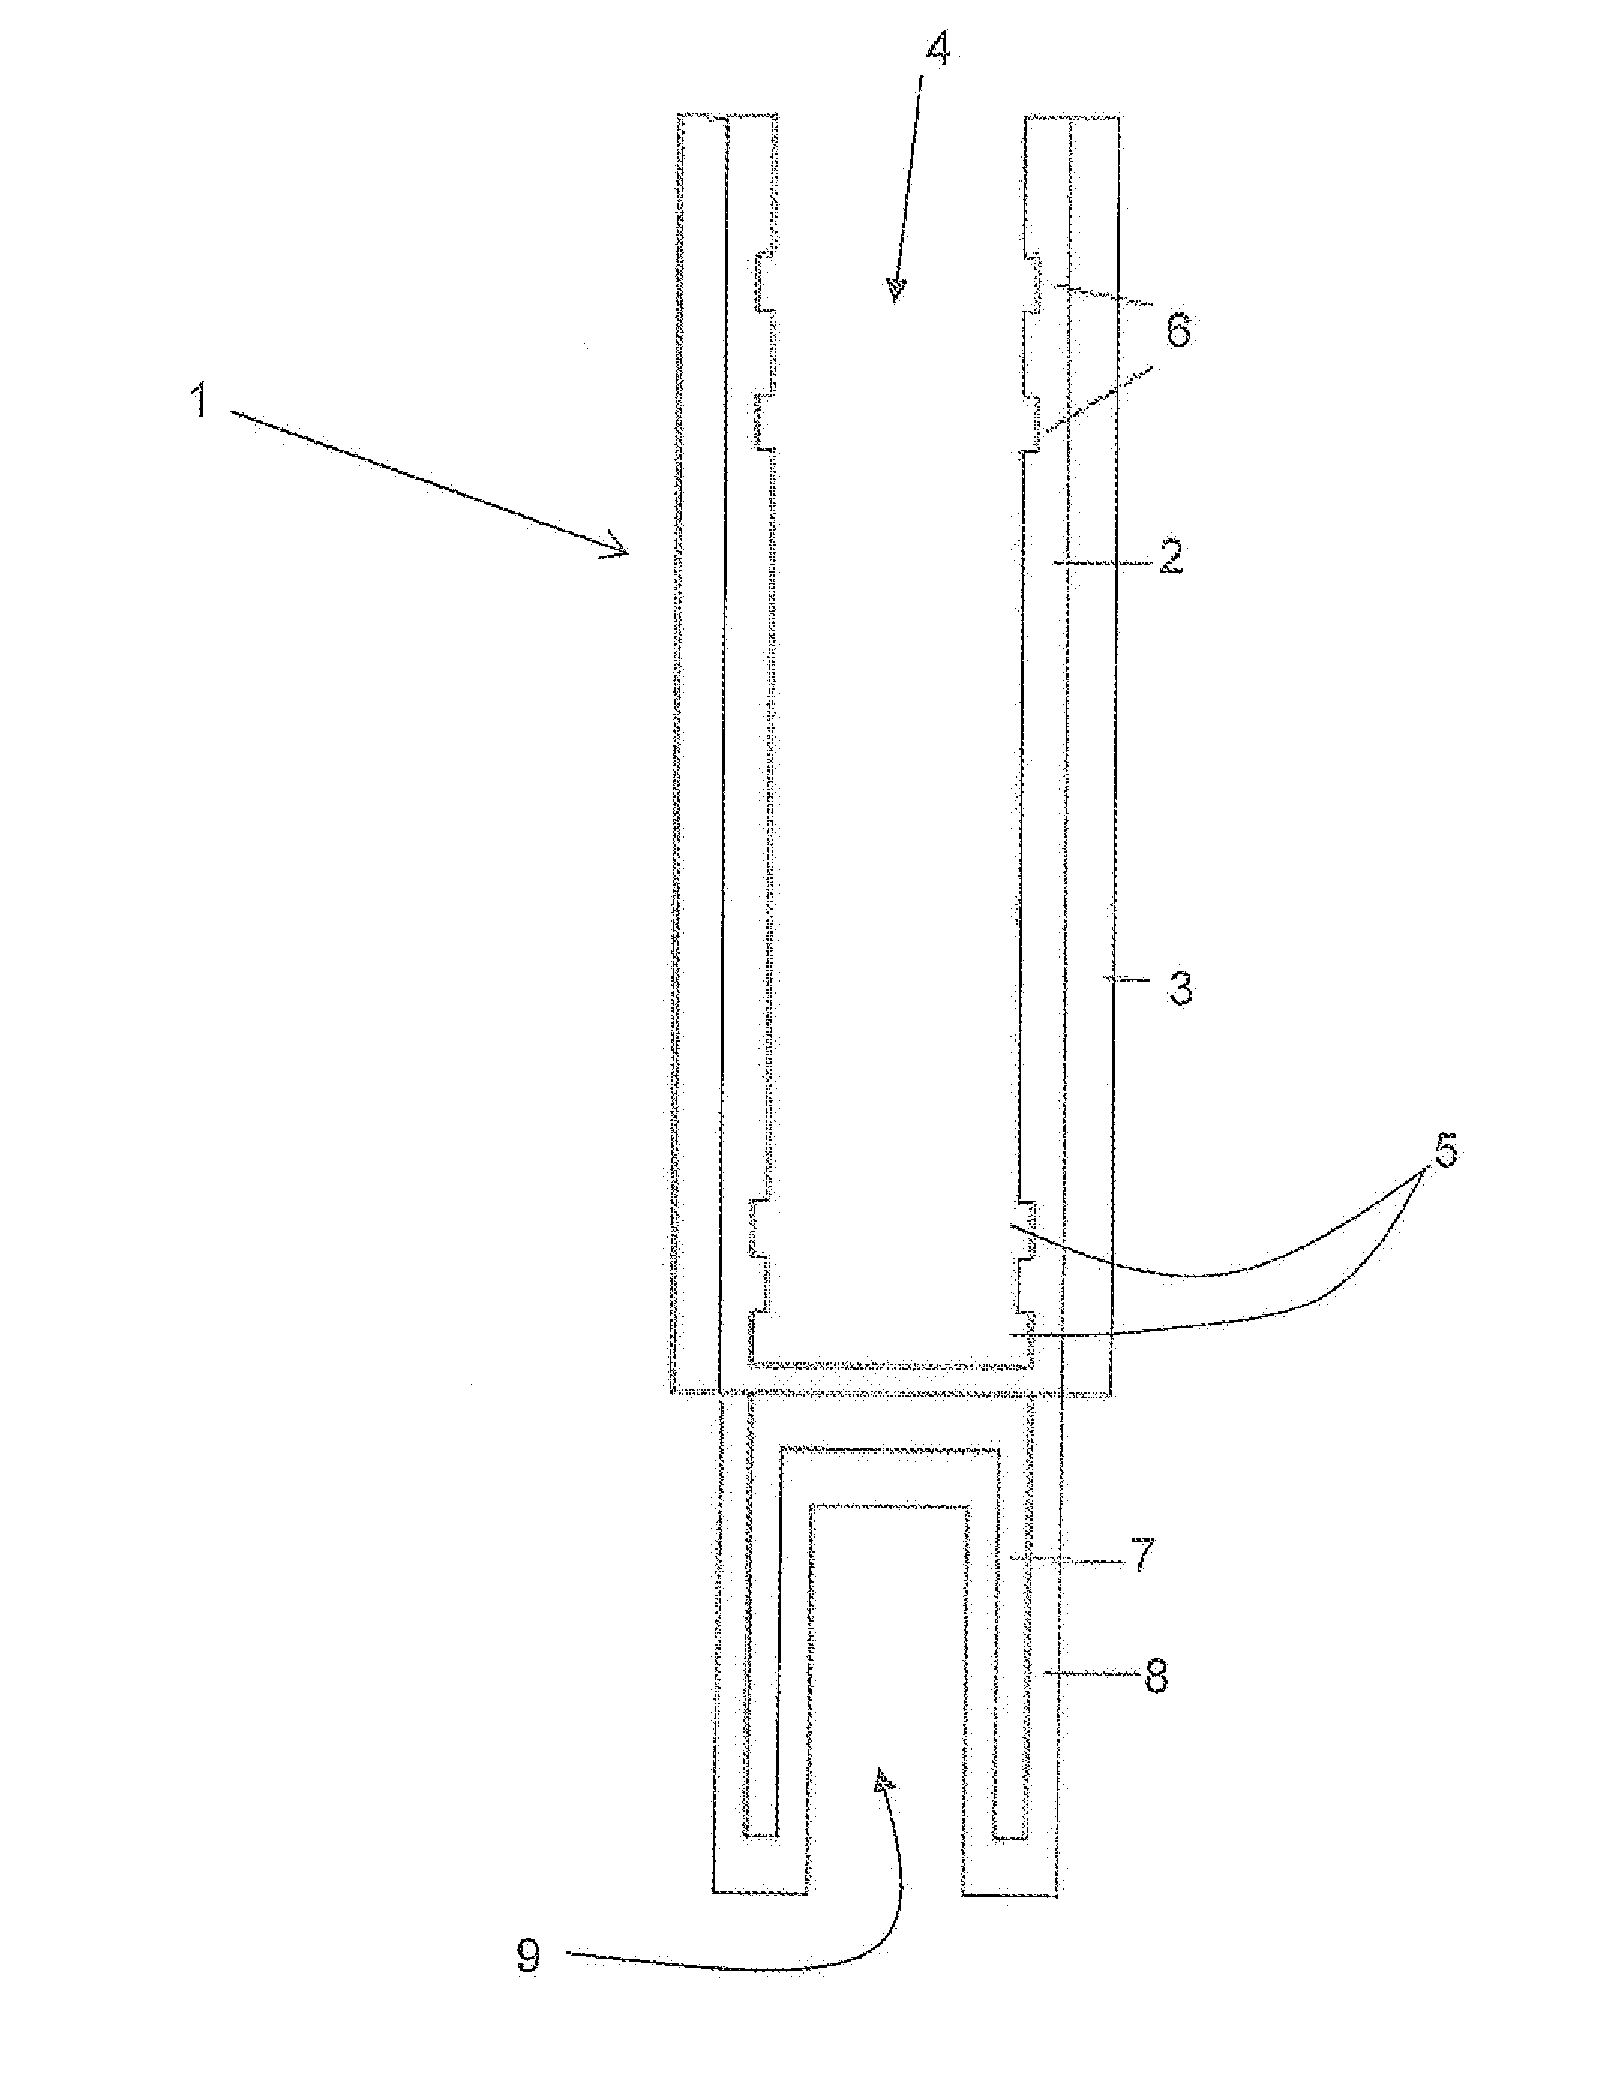 Method and Apparatus for Use in Well Abandonment